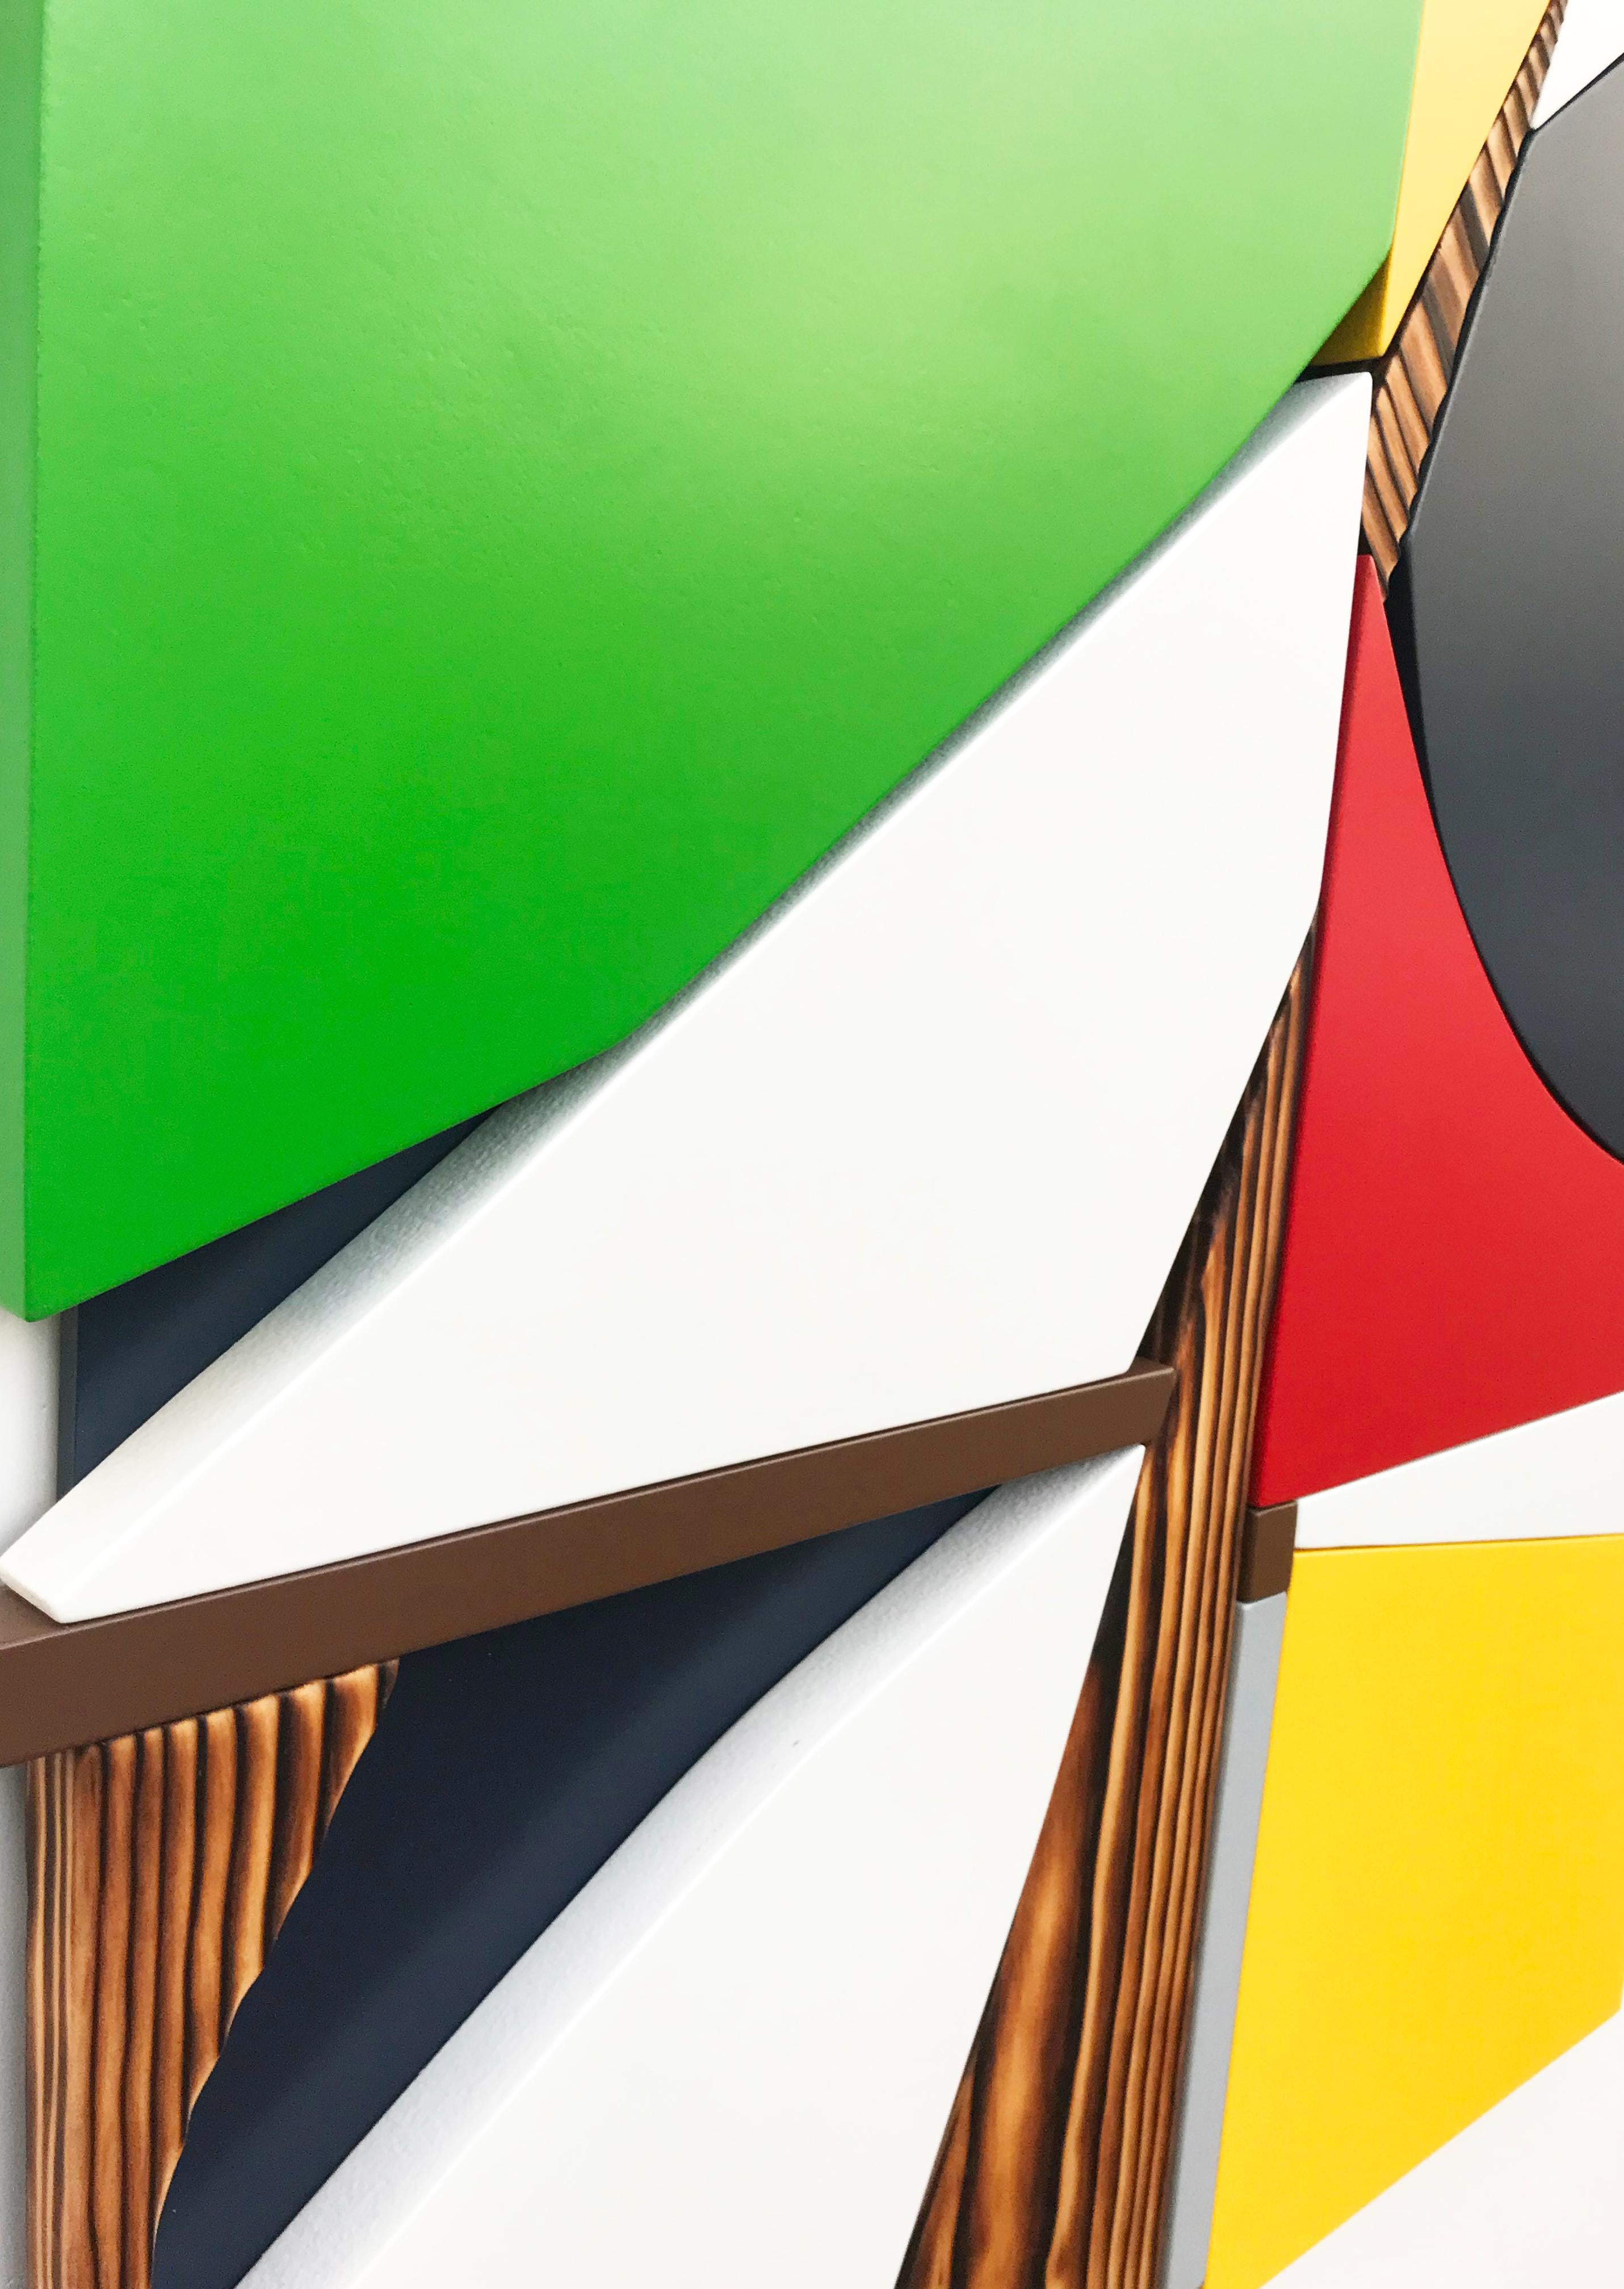 SSB4 (red yellow black mid-century wood wall sculpture green abstract geometric) - Brown Abstract Sculpture by Scott Troxel